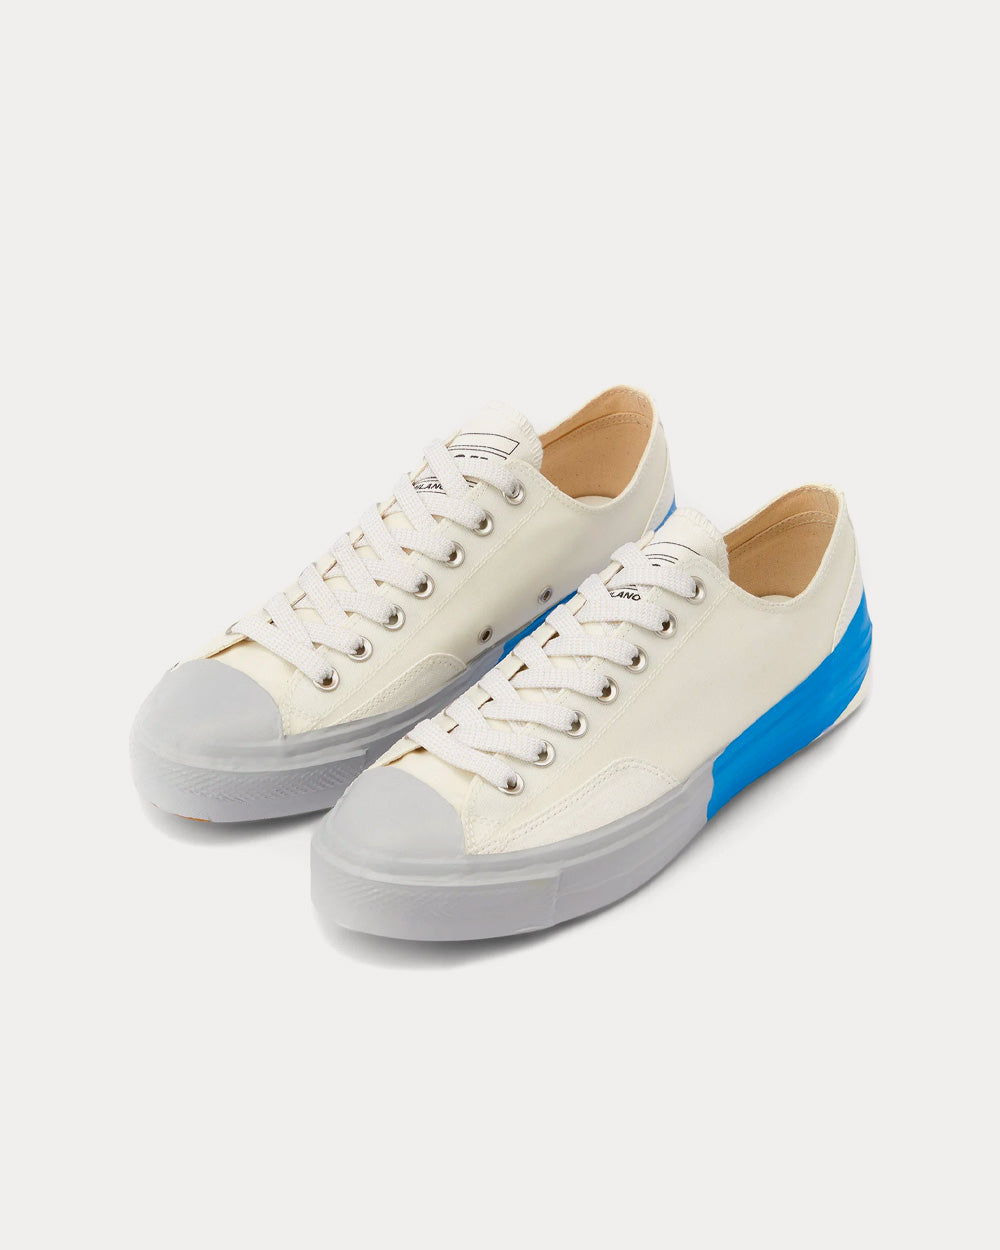 MSGM - Tape Appliqued Vulcanized Canvas White / Blue Low Top Sneakers